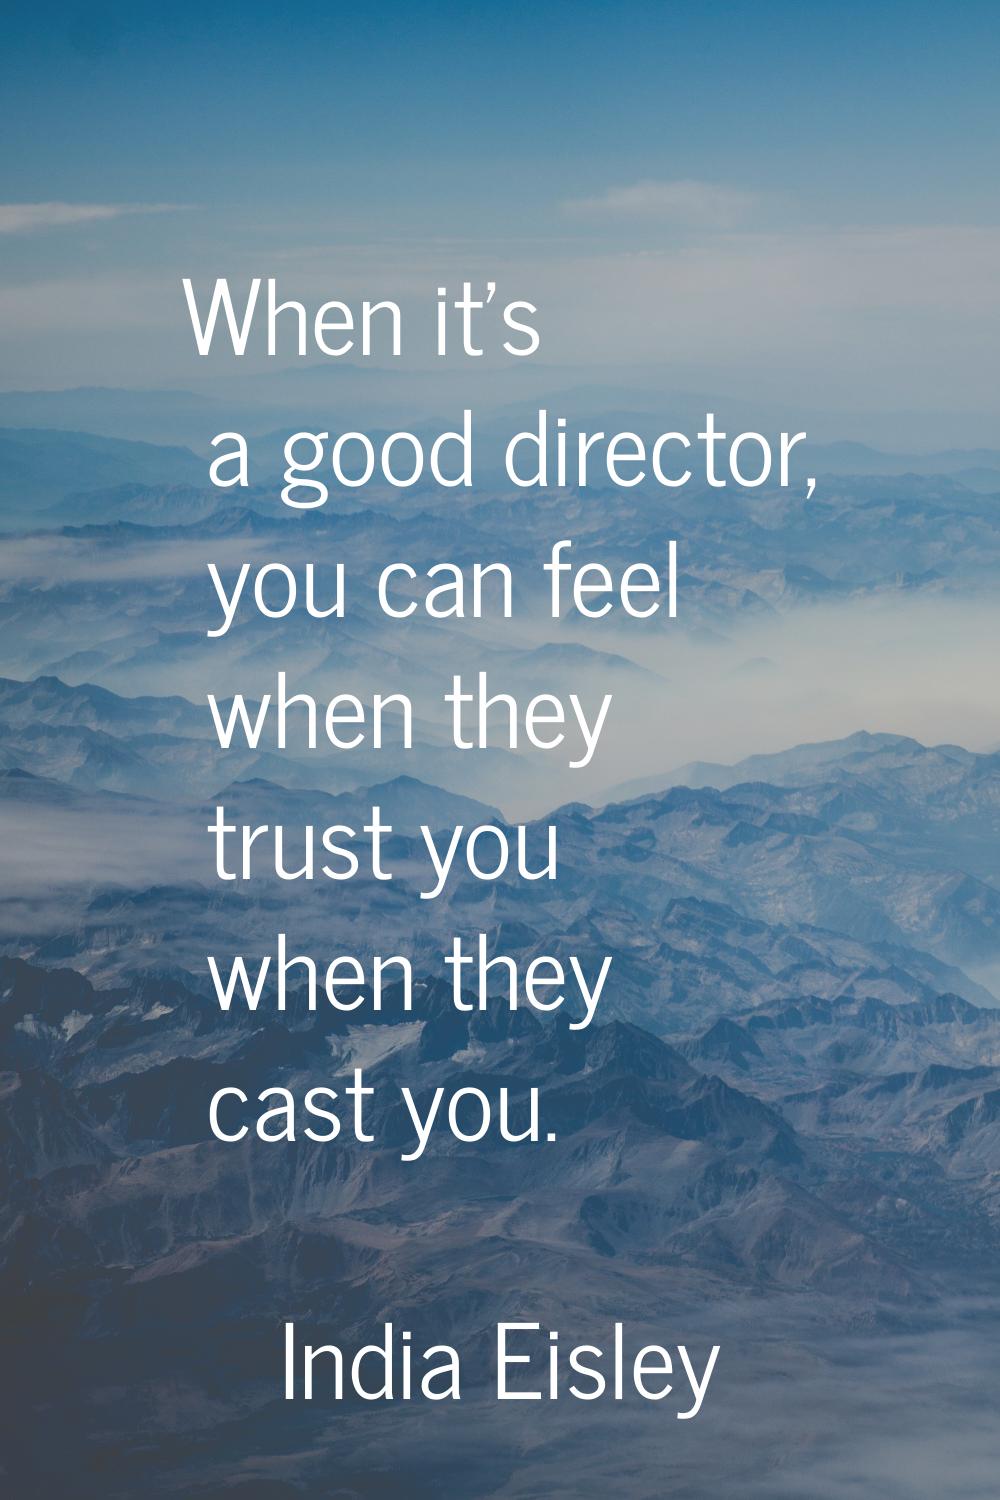 When it's a good director, you can feel when they trust you when they cast you.